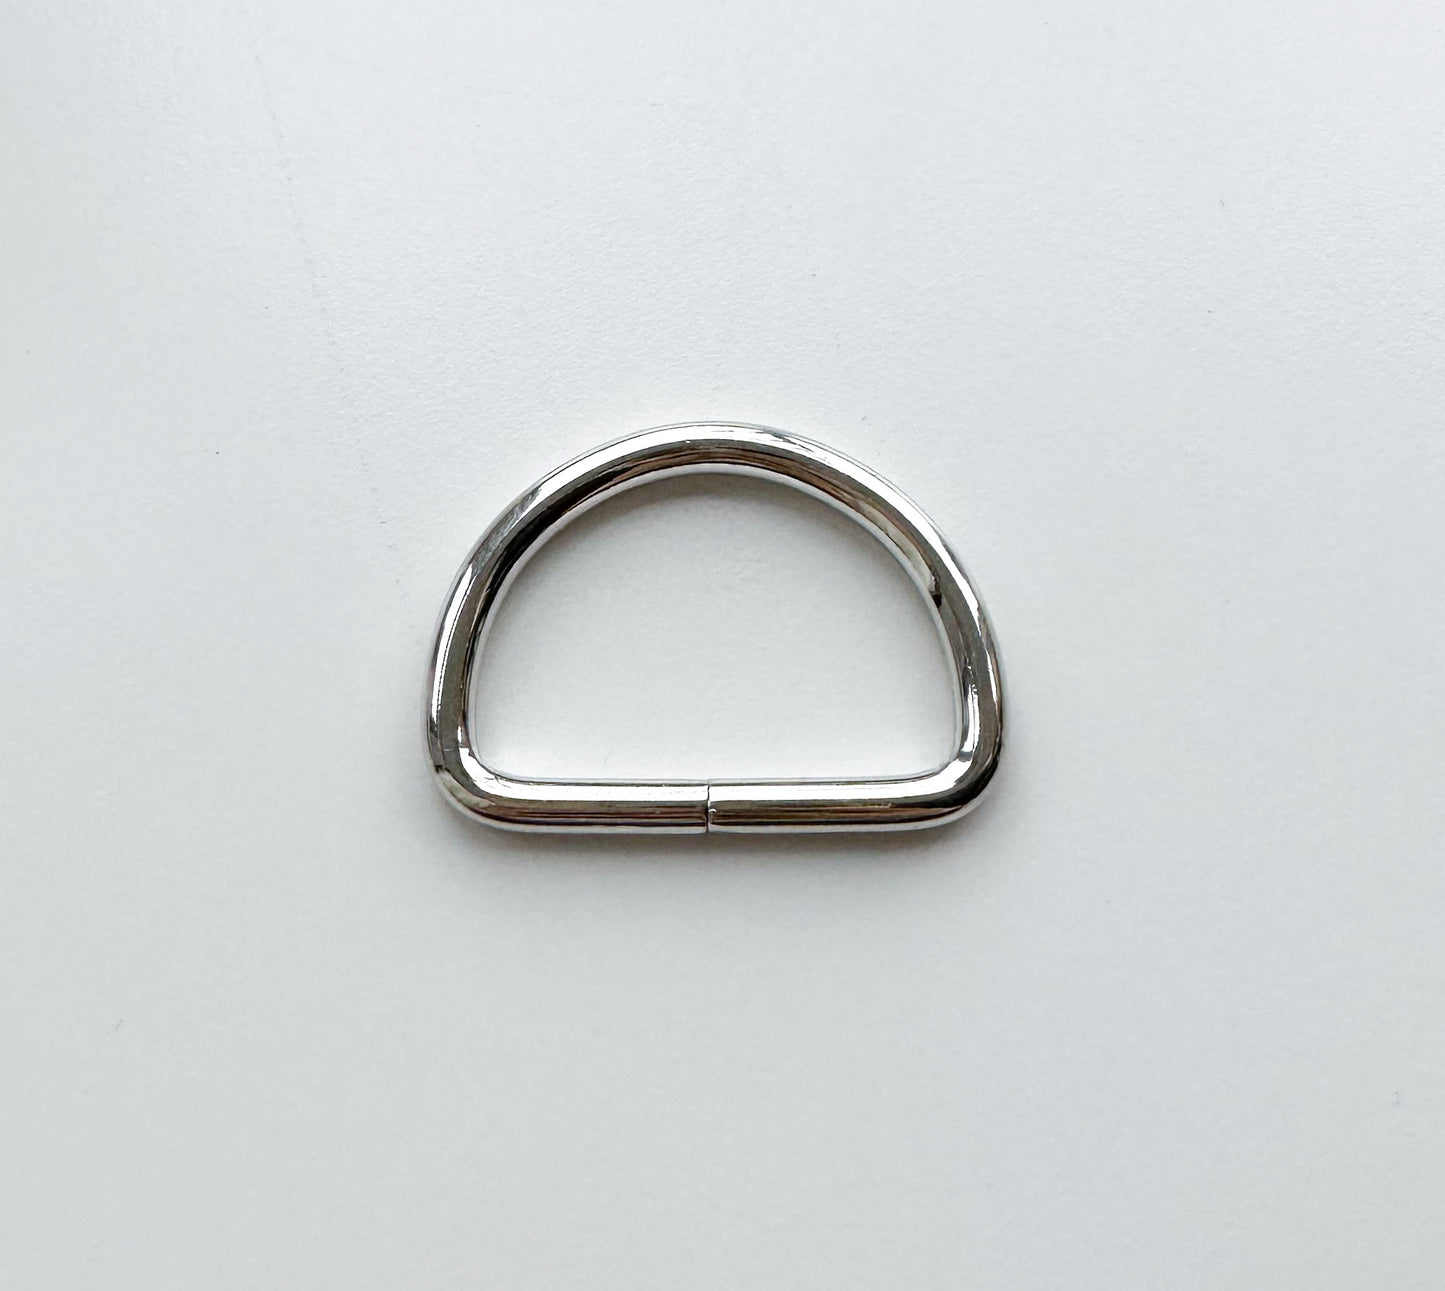 D-ring size: 1.5” (38mm)